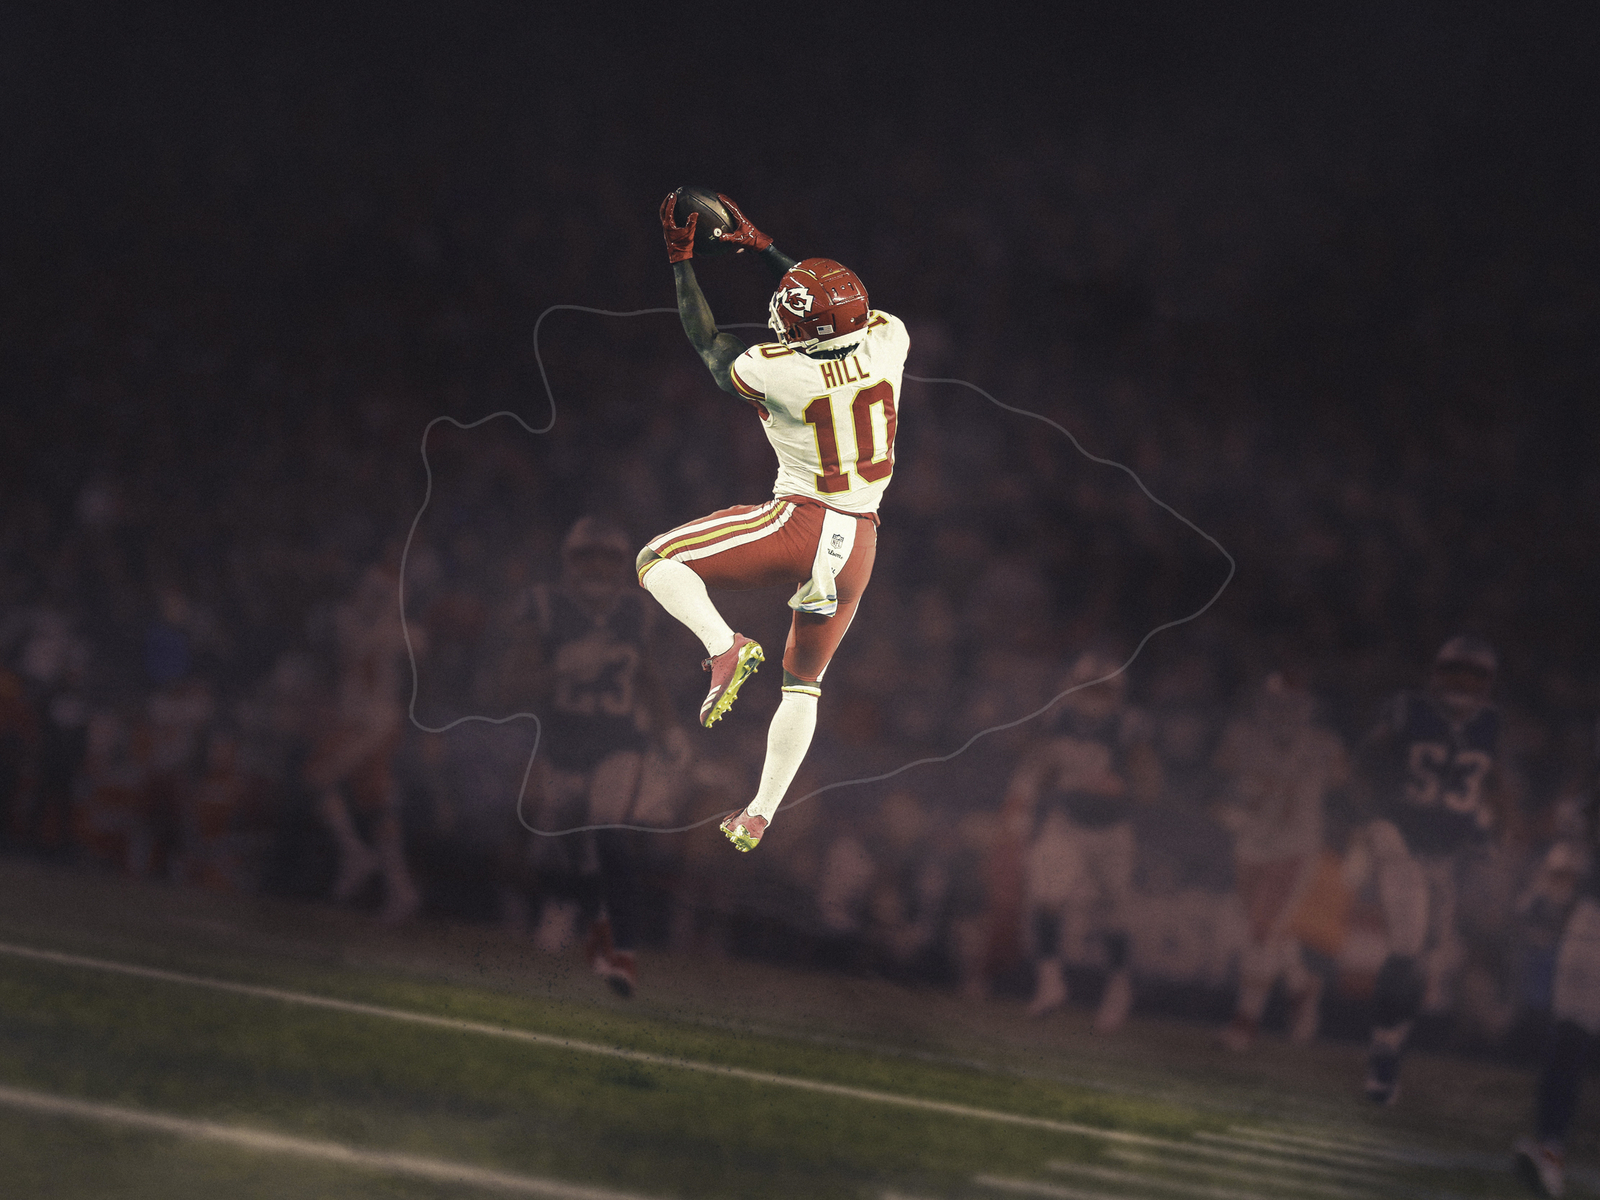 Tyreek Hill Is Running With Football Showing Victory Sign In Blur Players  Background HD Tyreek Hill Wallpapers  HD Wallpapers  ID 55691